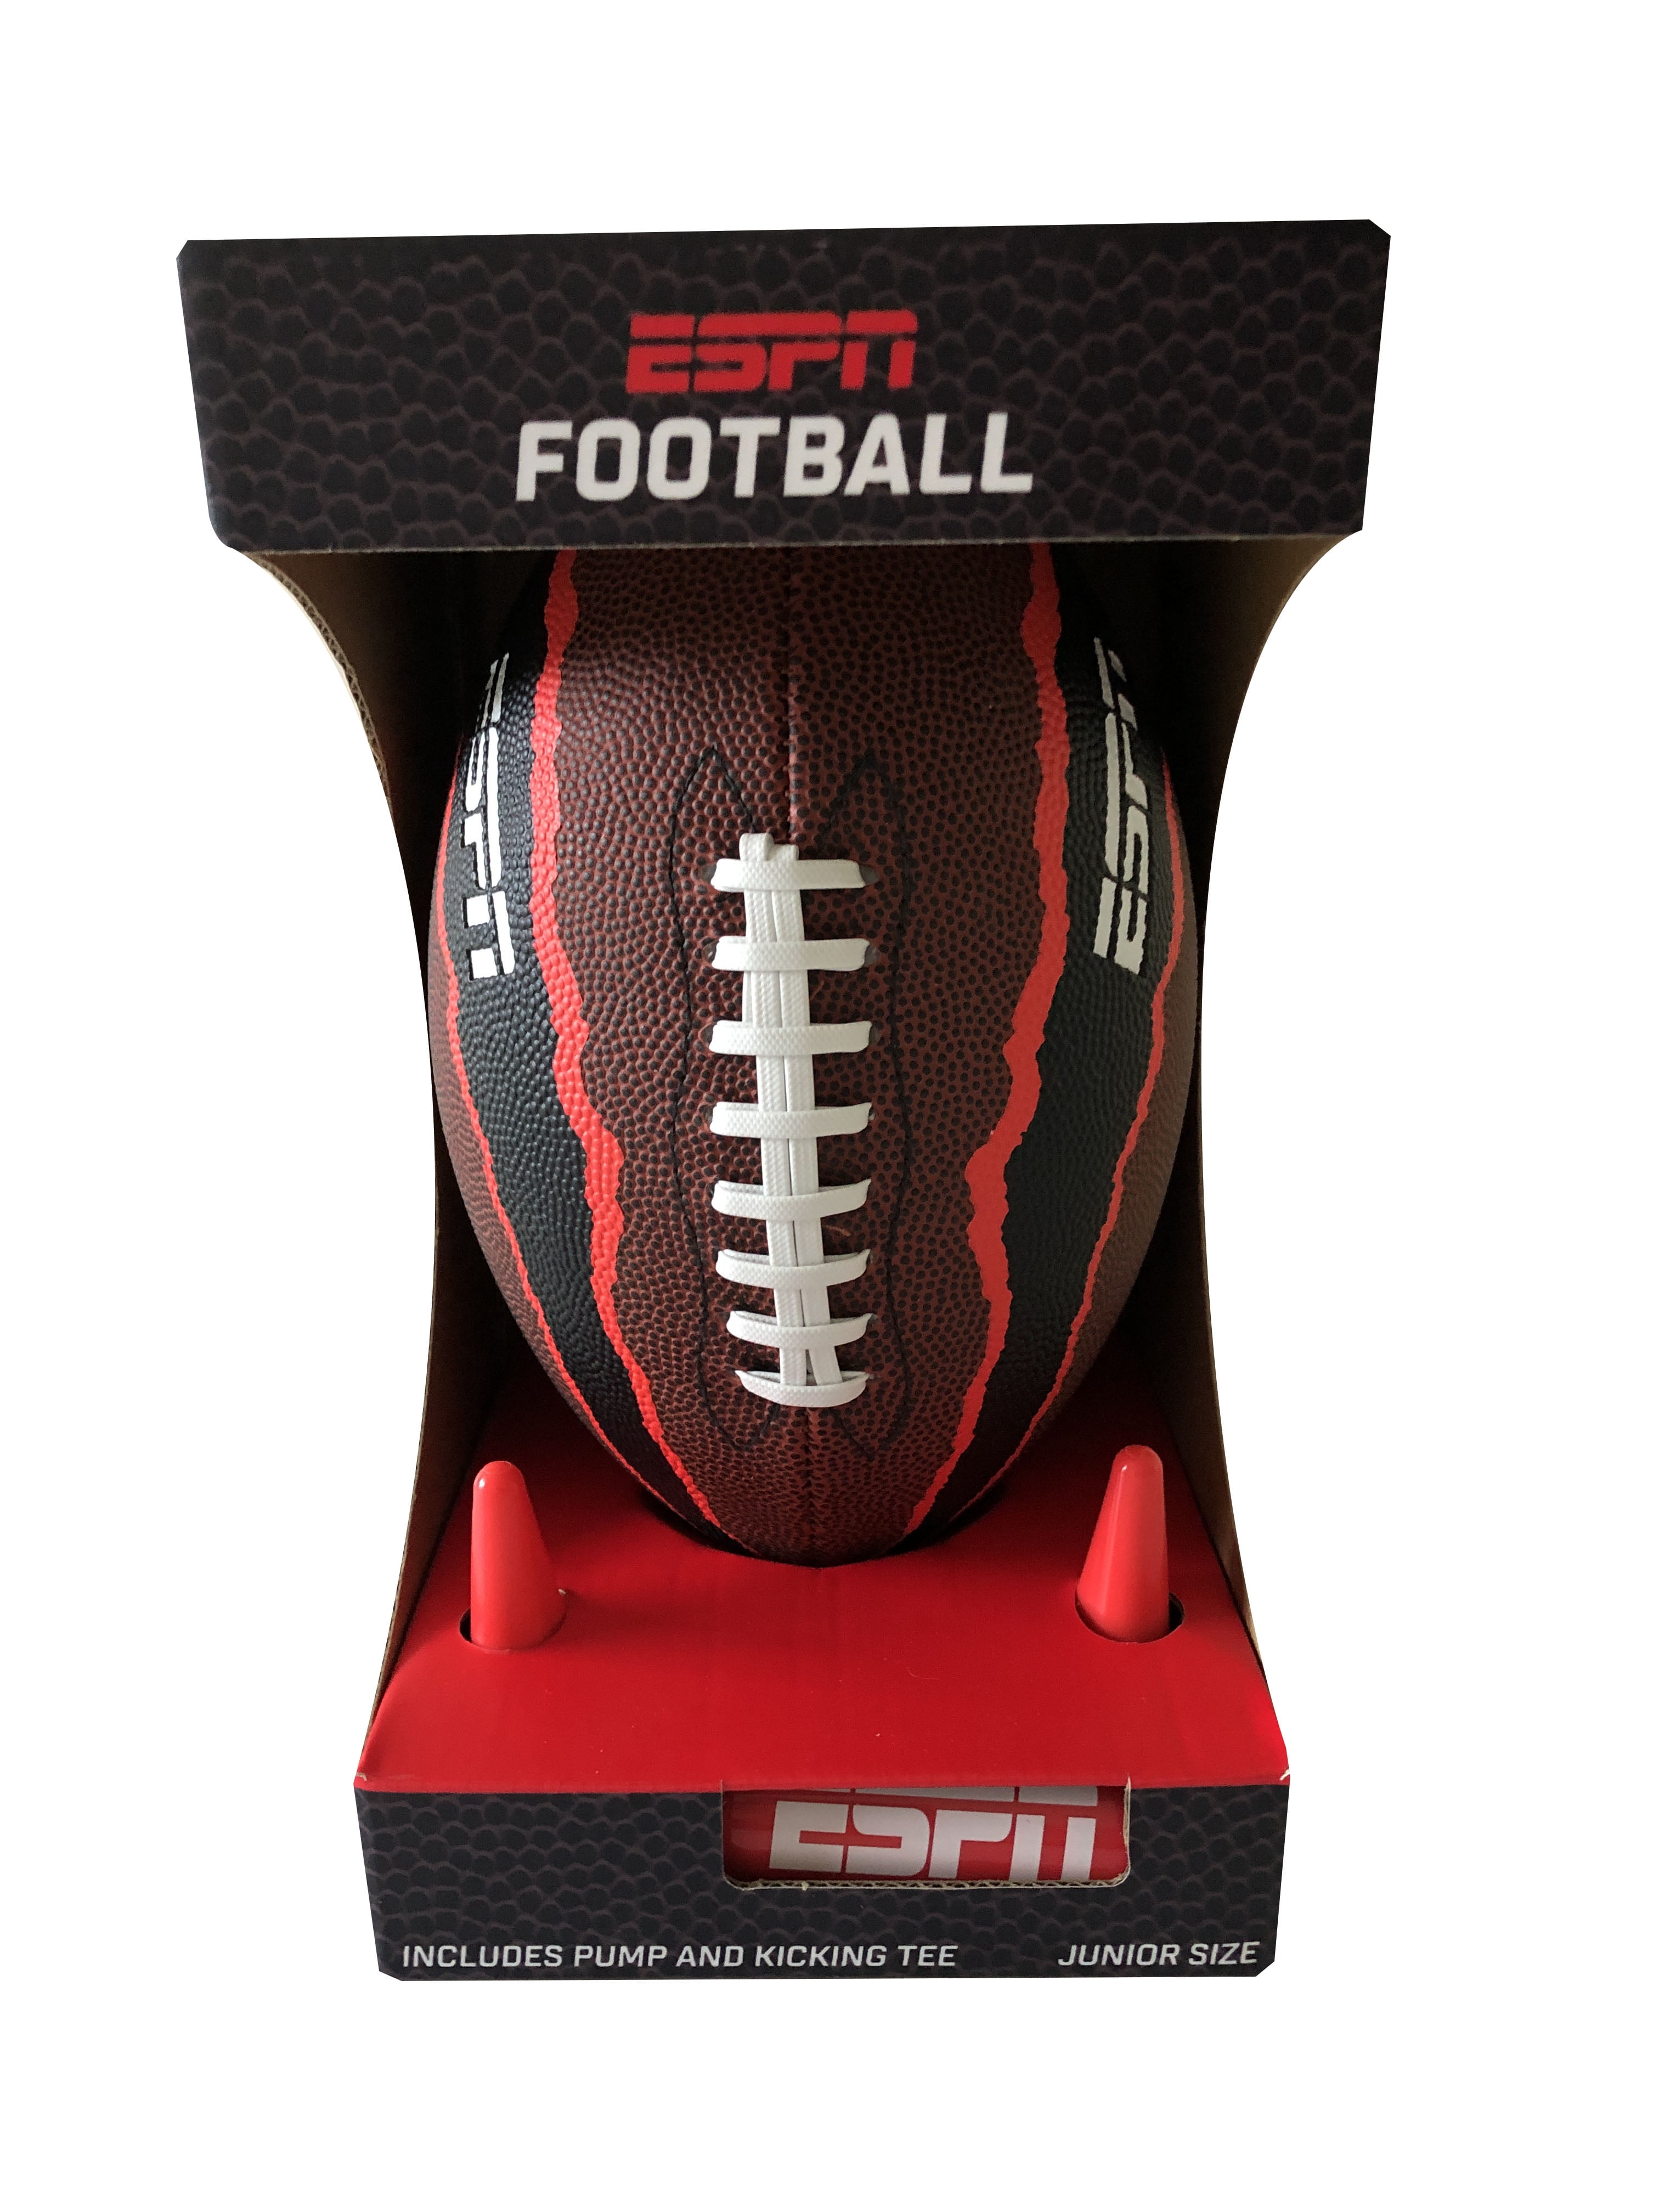 Coca-Cola Football Does Not Include Pump New Not Inflated 